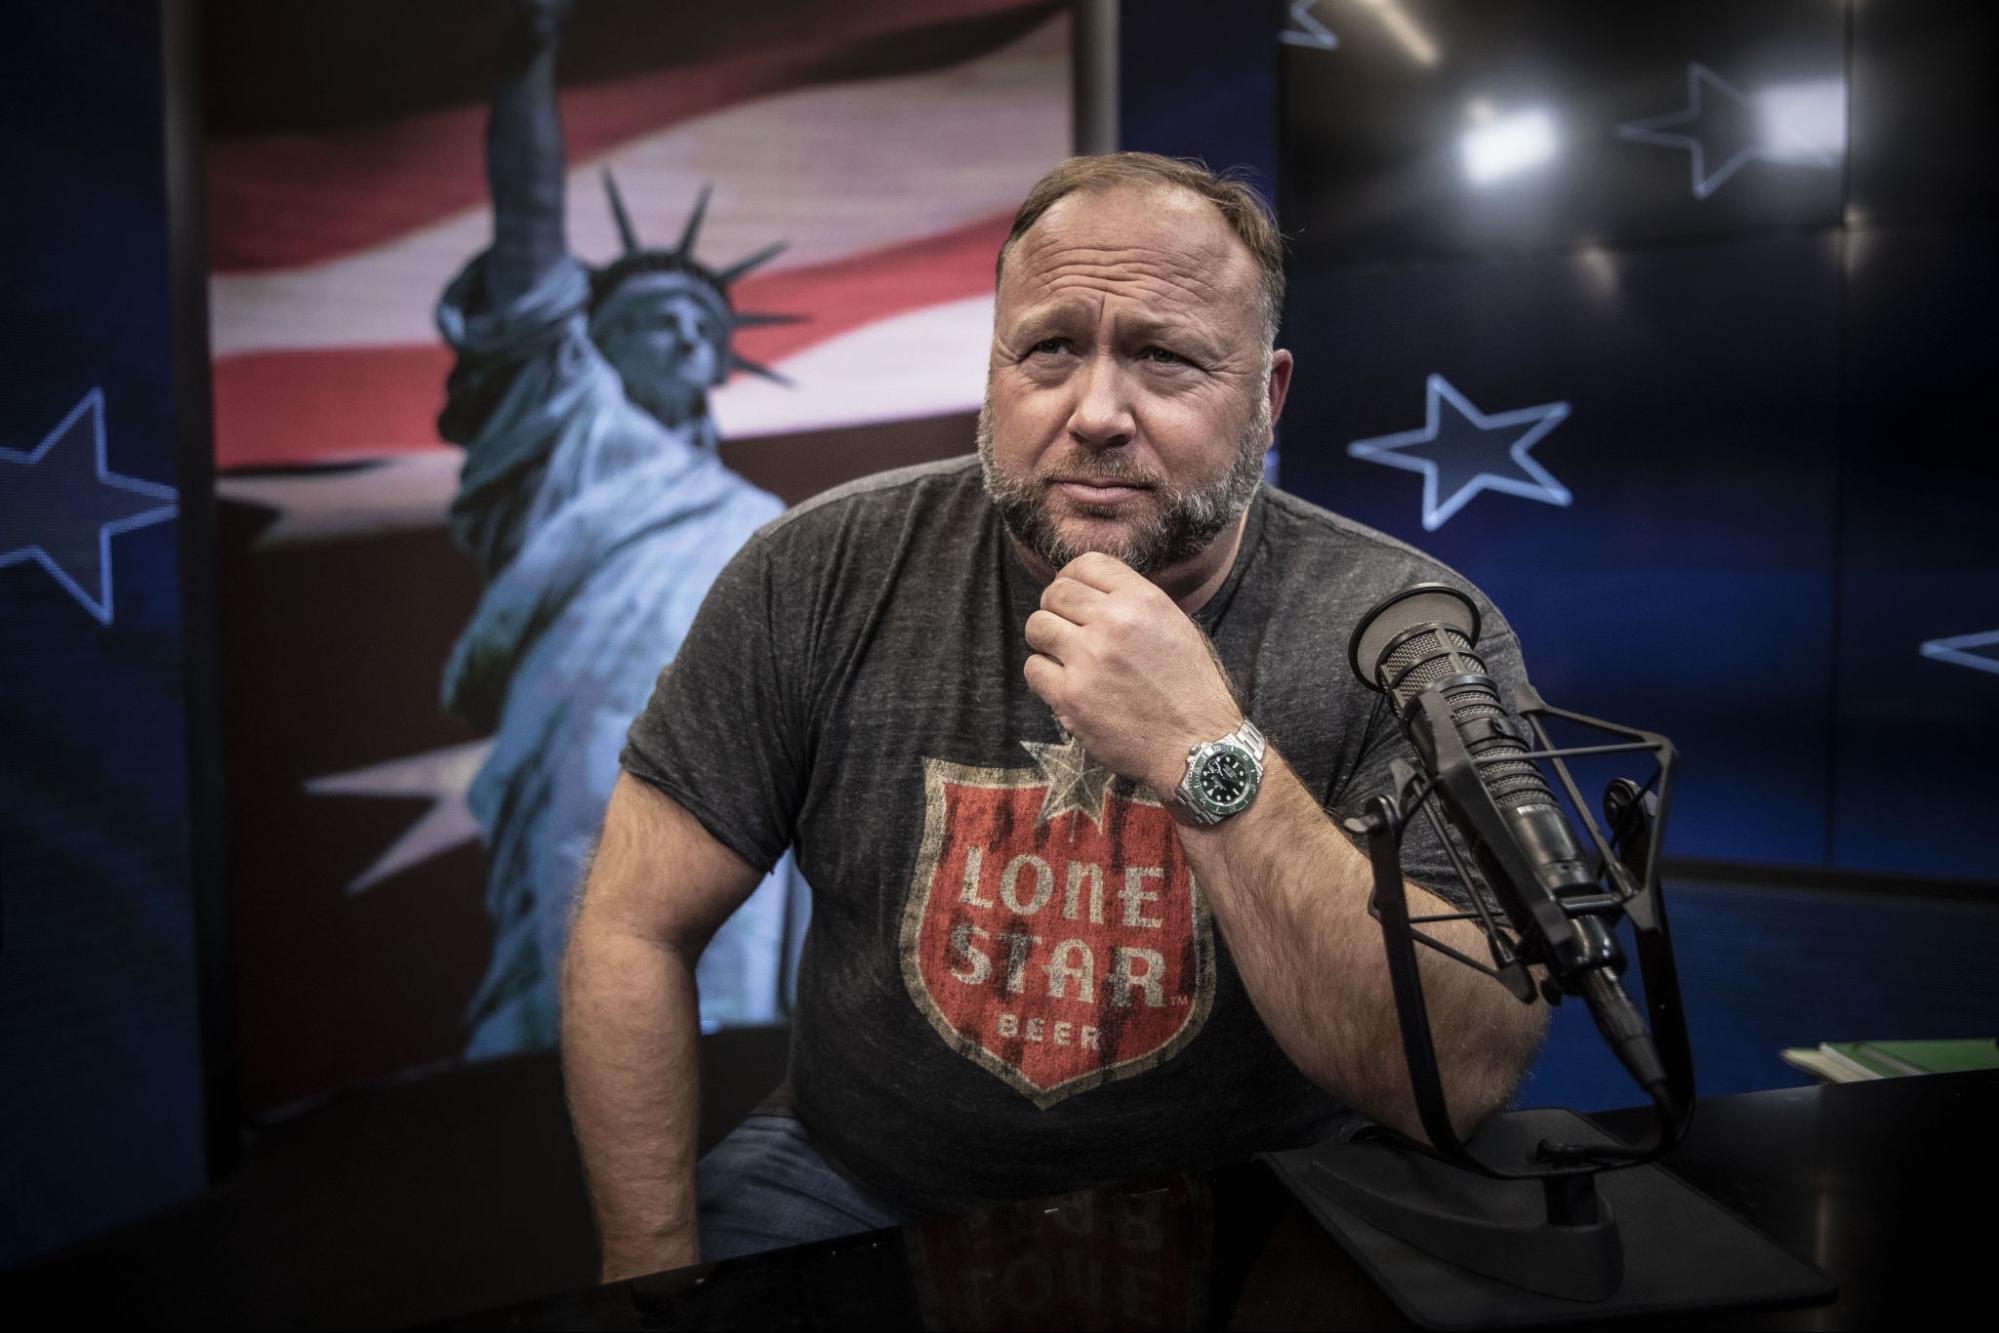 Alex Jones Diary: My Strange Experience with ‘Real’ Cancel Culture